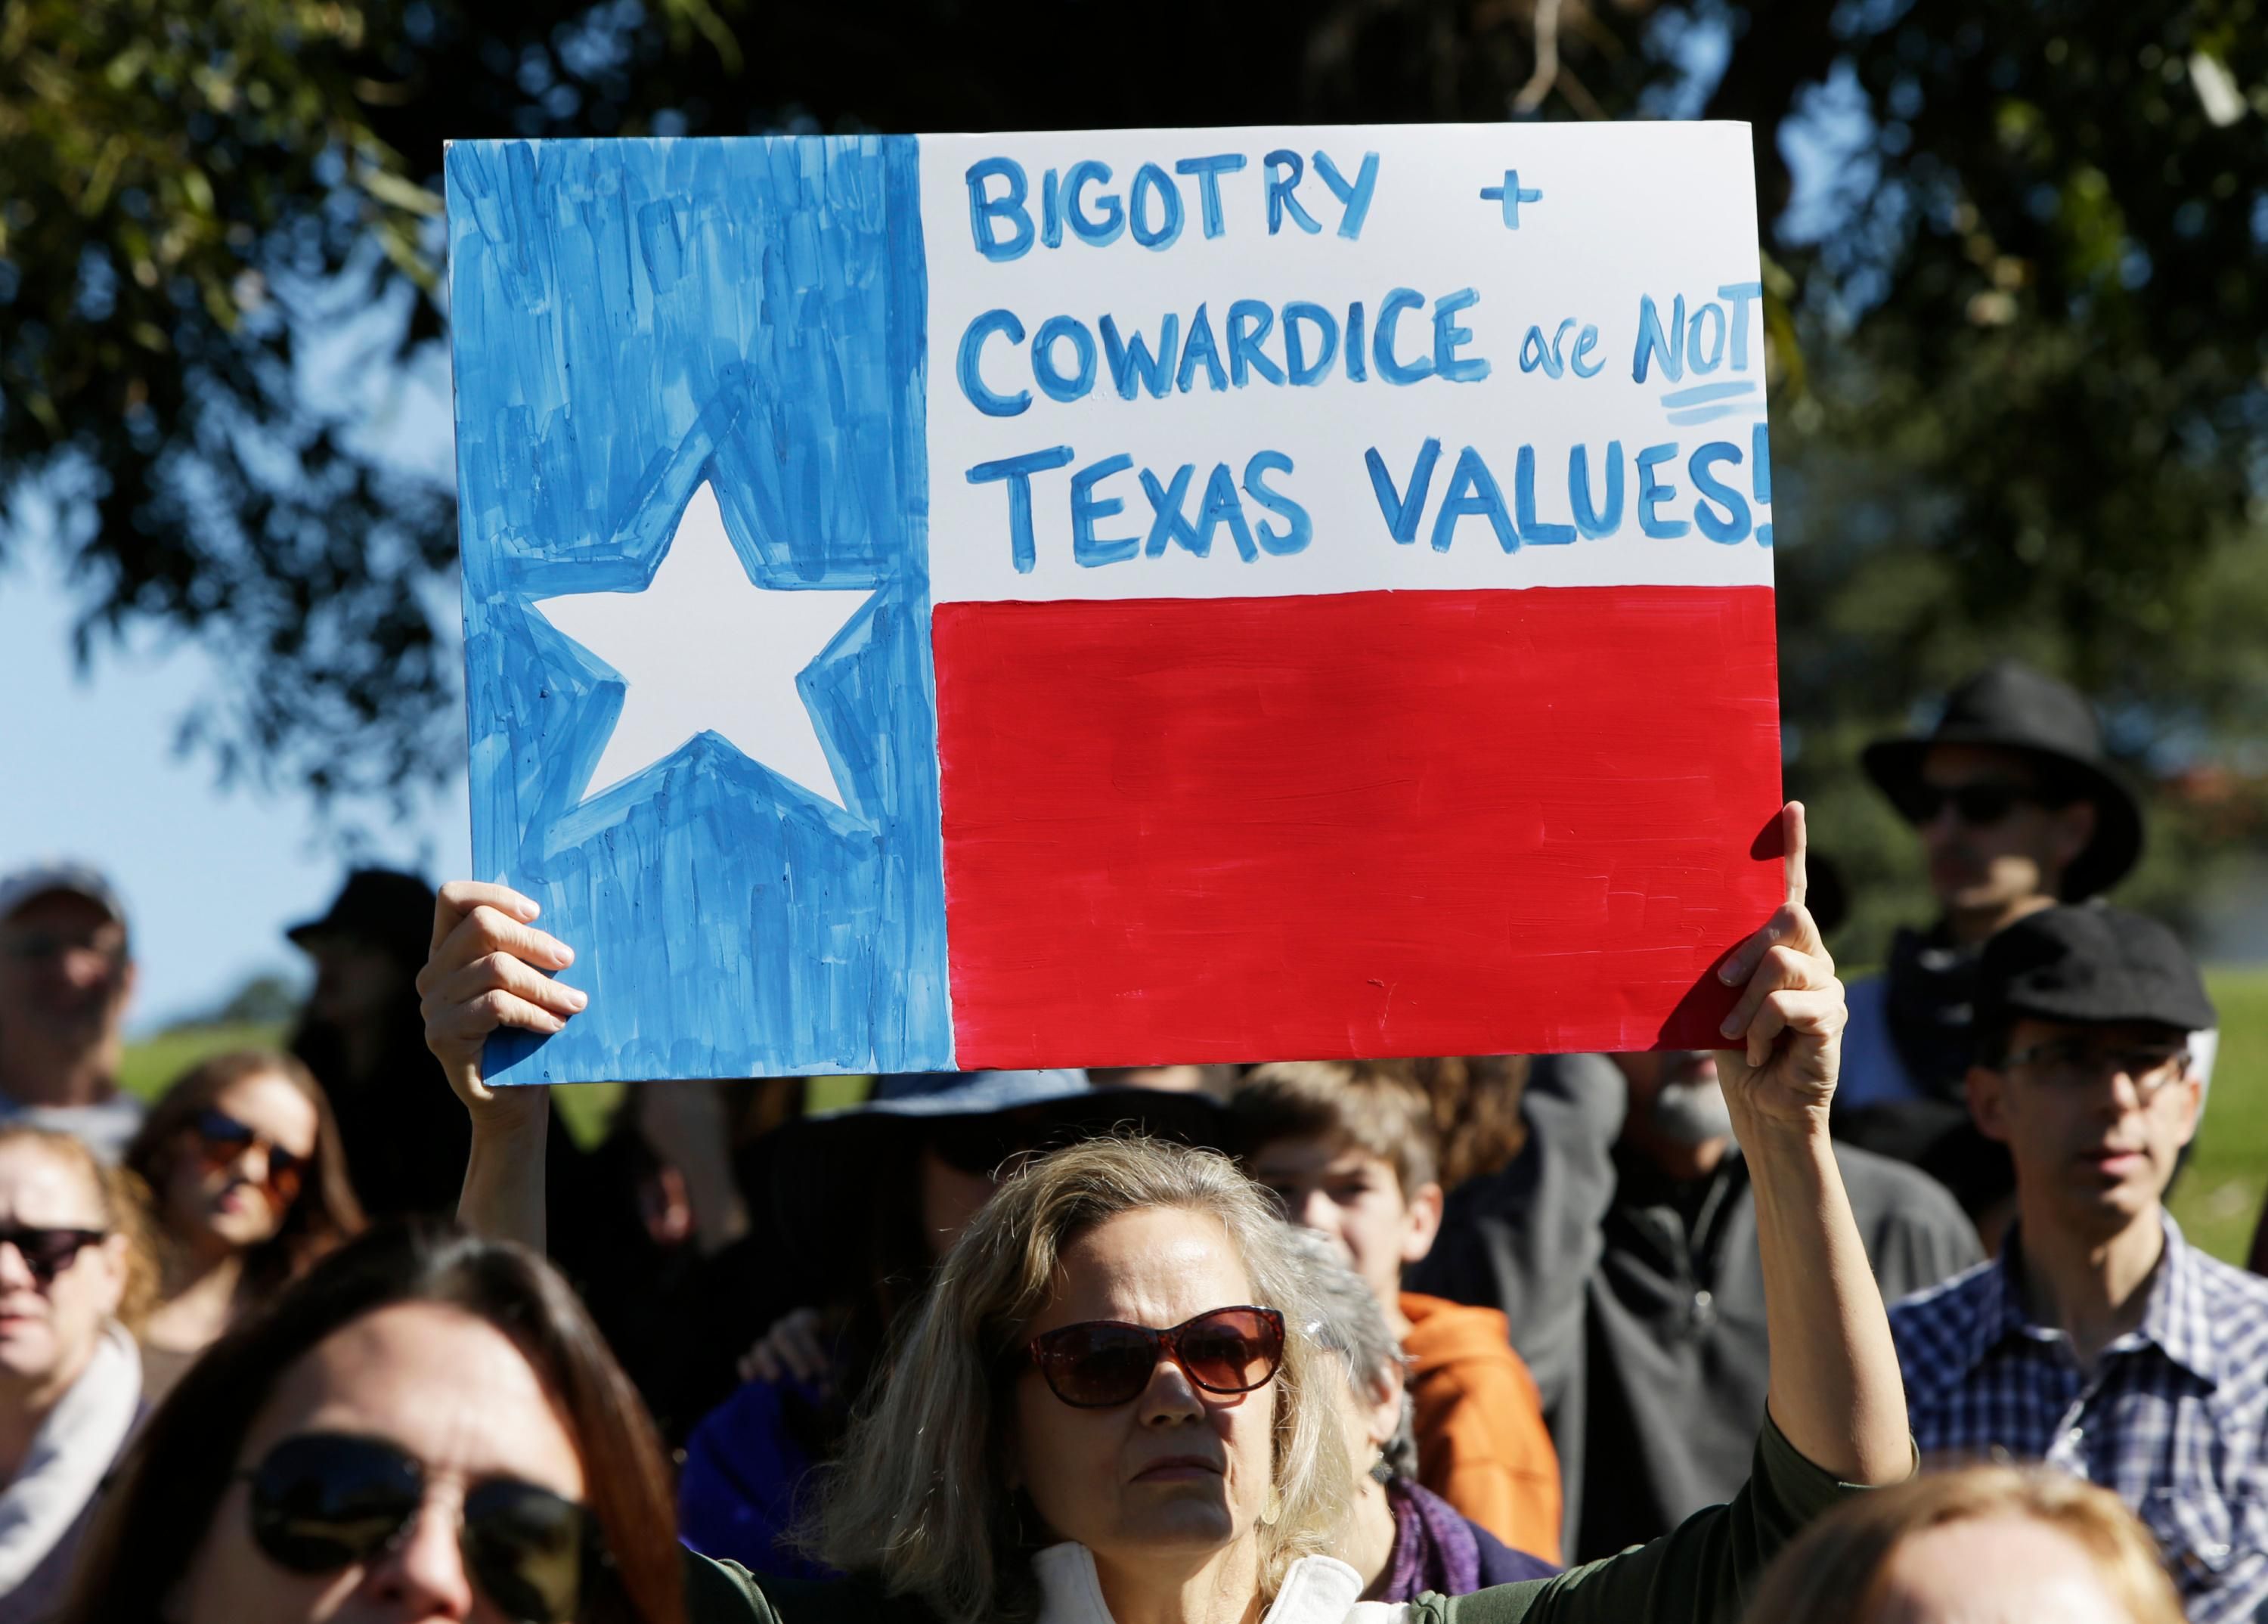 Protest sign reading, "Bigotry and cowardice are not Texas values"